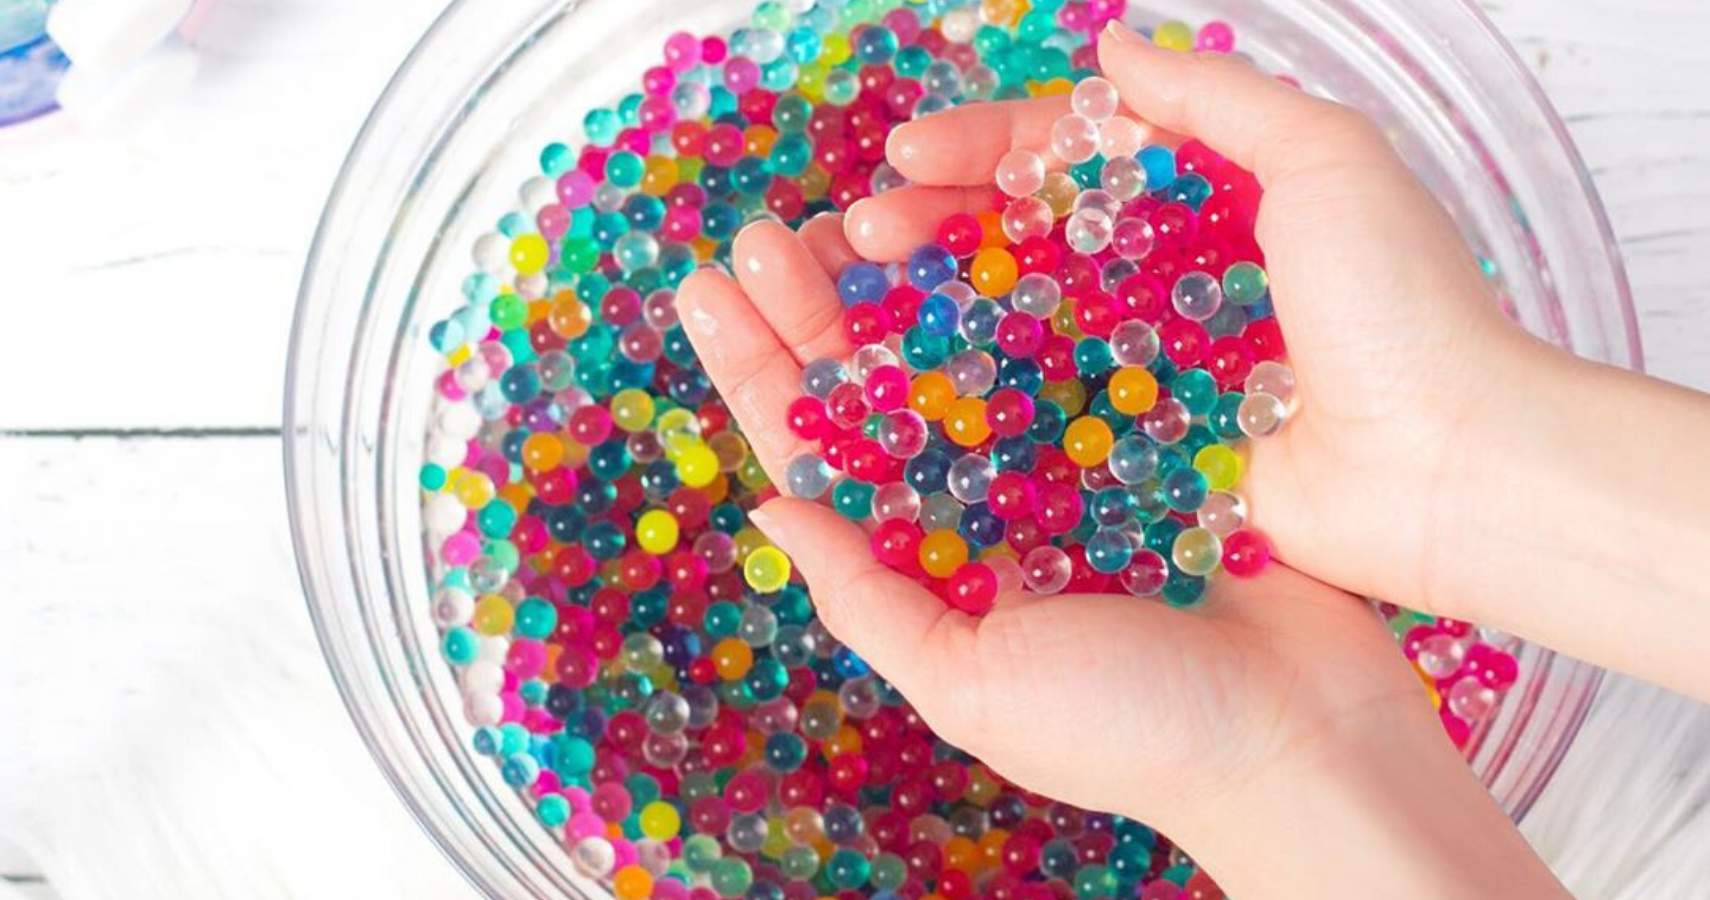 Orbeez Unveiled: What Are They and How Can You Use Them?